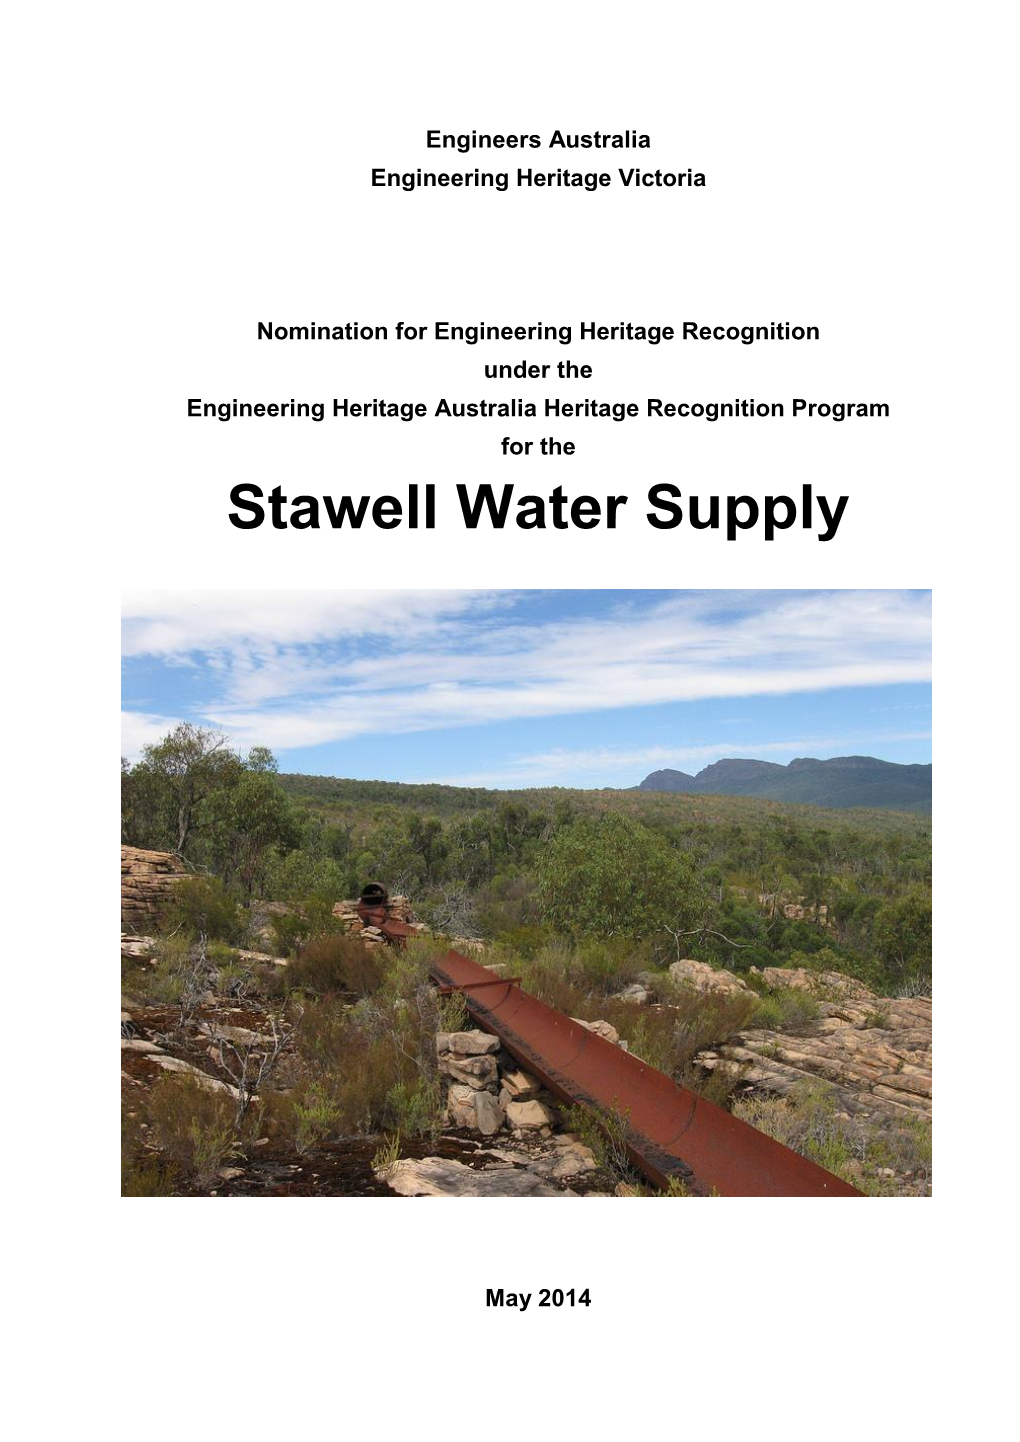 Stawell Water Supply